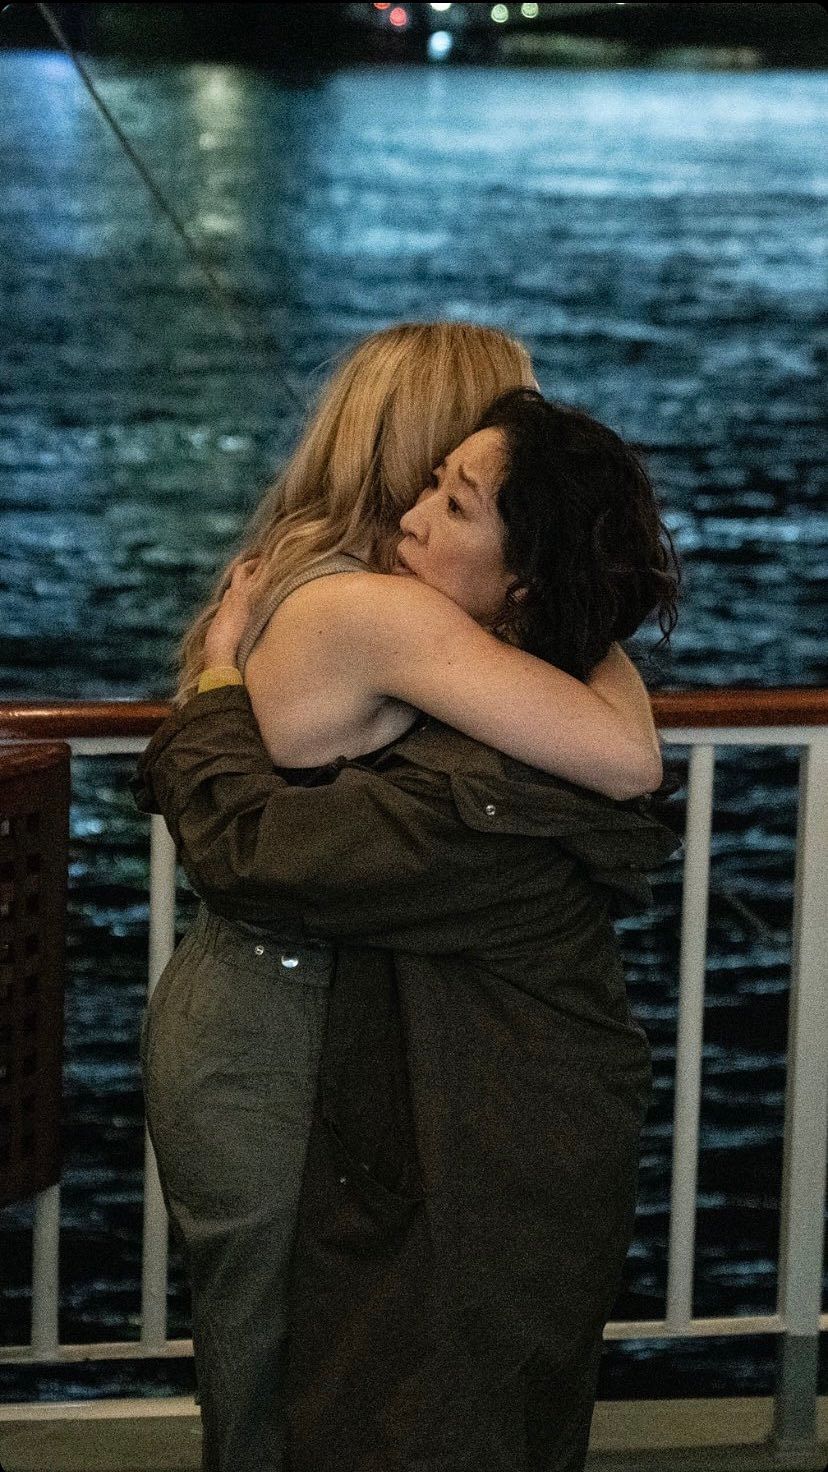 'Killing Eve' was loved for its leads Sandra Oh and Jodie Comer but the finale left many heartbroken.